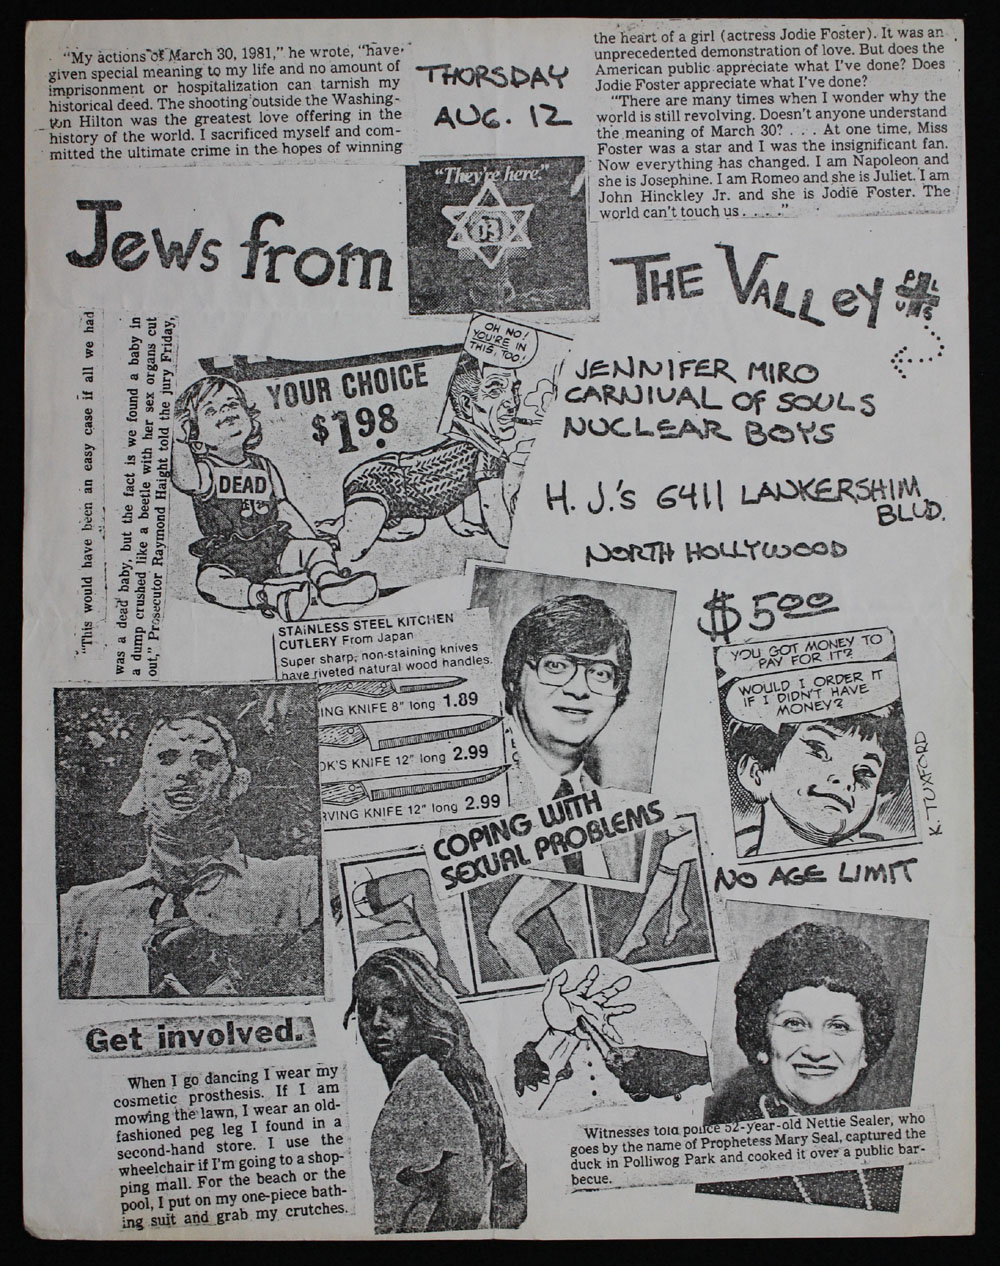 JEWS FROM THE VALLEY w/ Jennifer Miro, Carnival of Souls, Nuclear Boys at HJ's